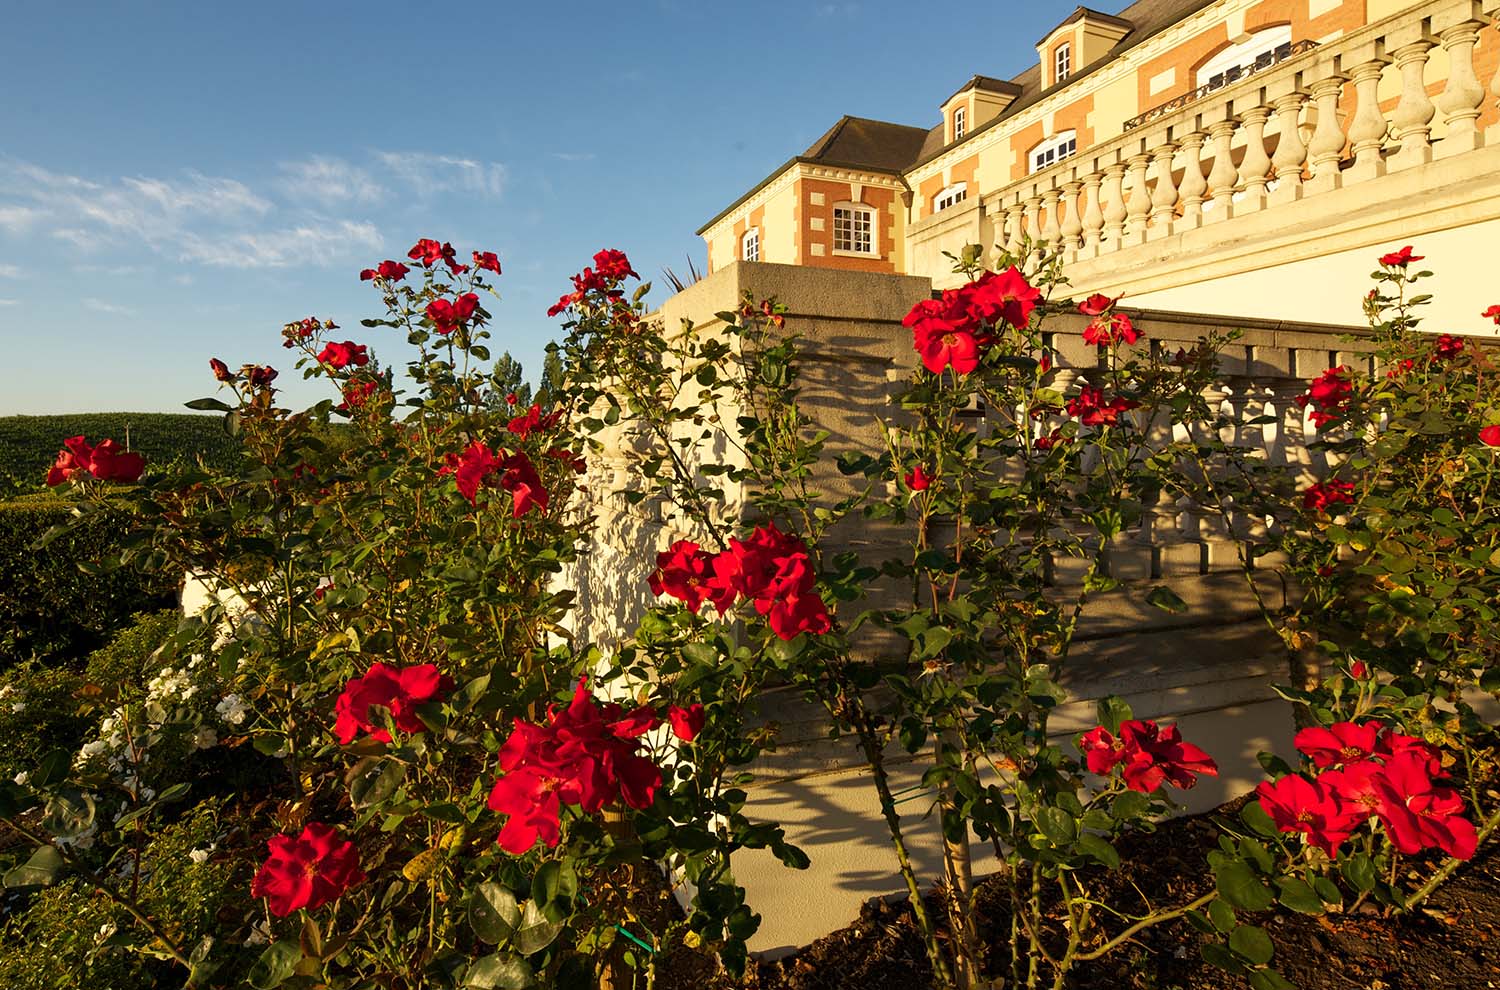 Red roses with the Chateau Terrace Steps